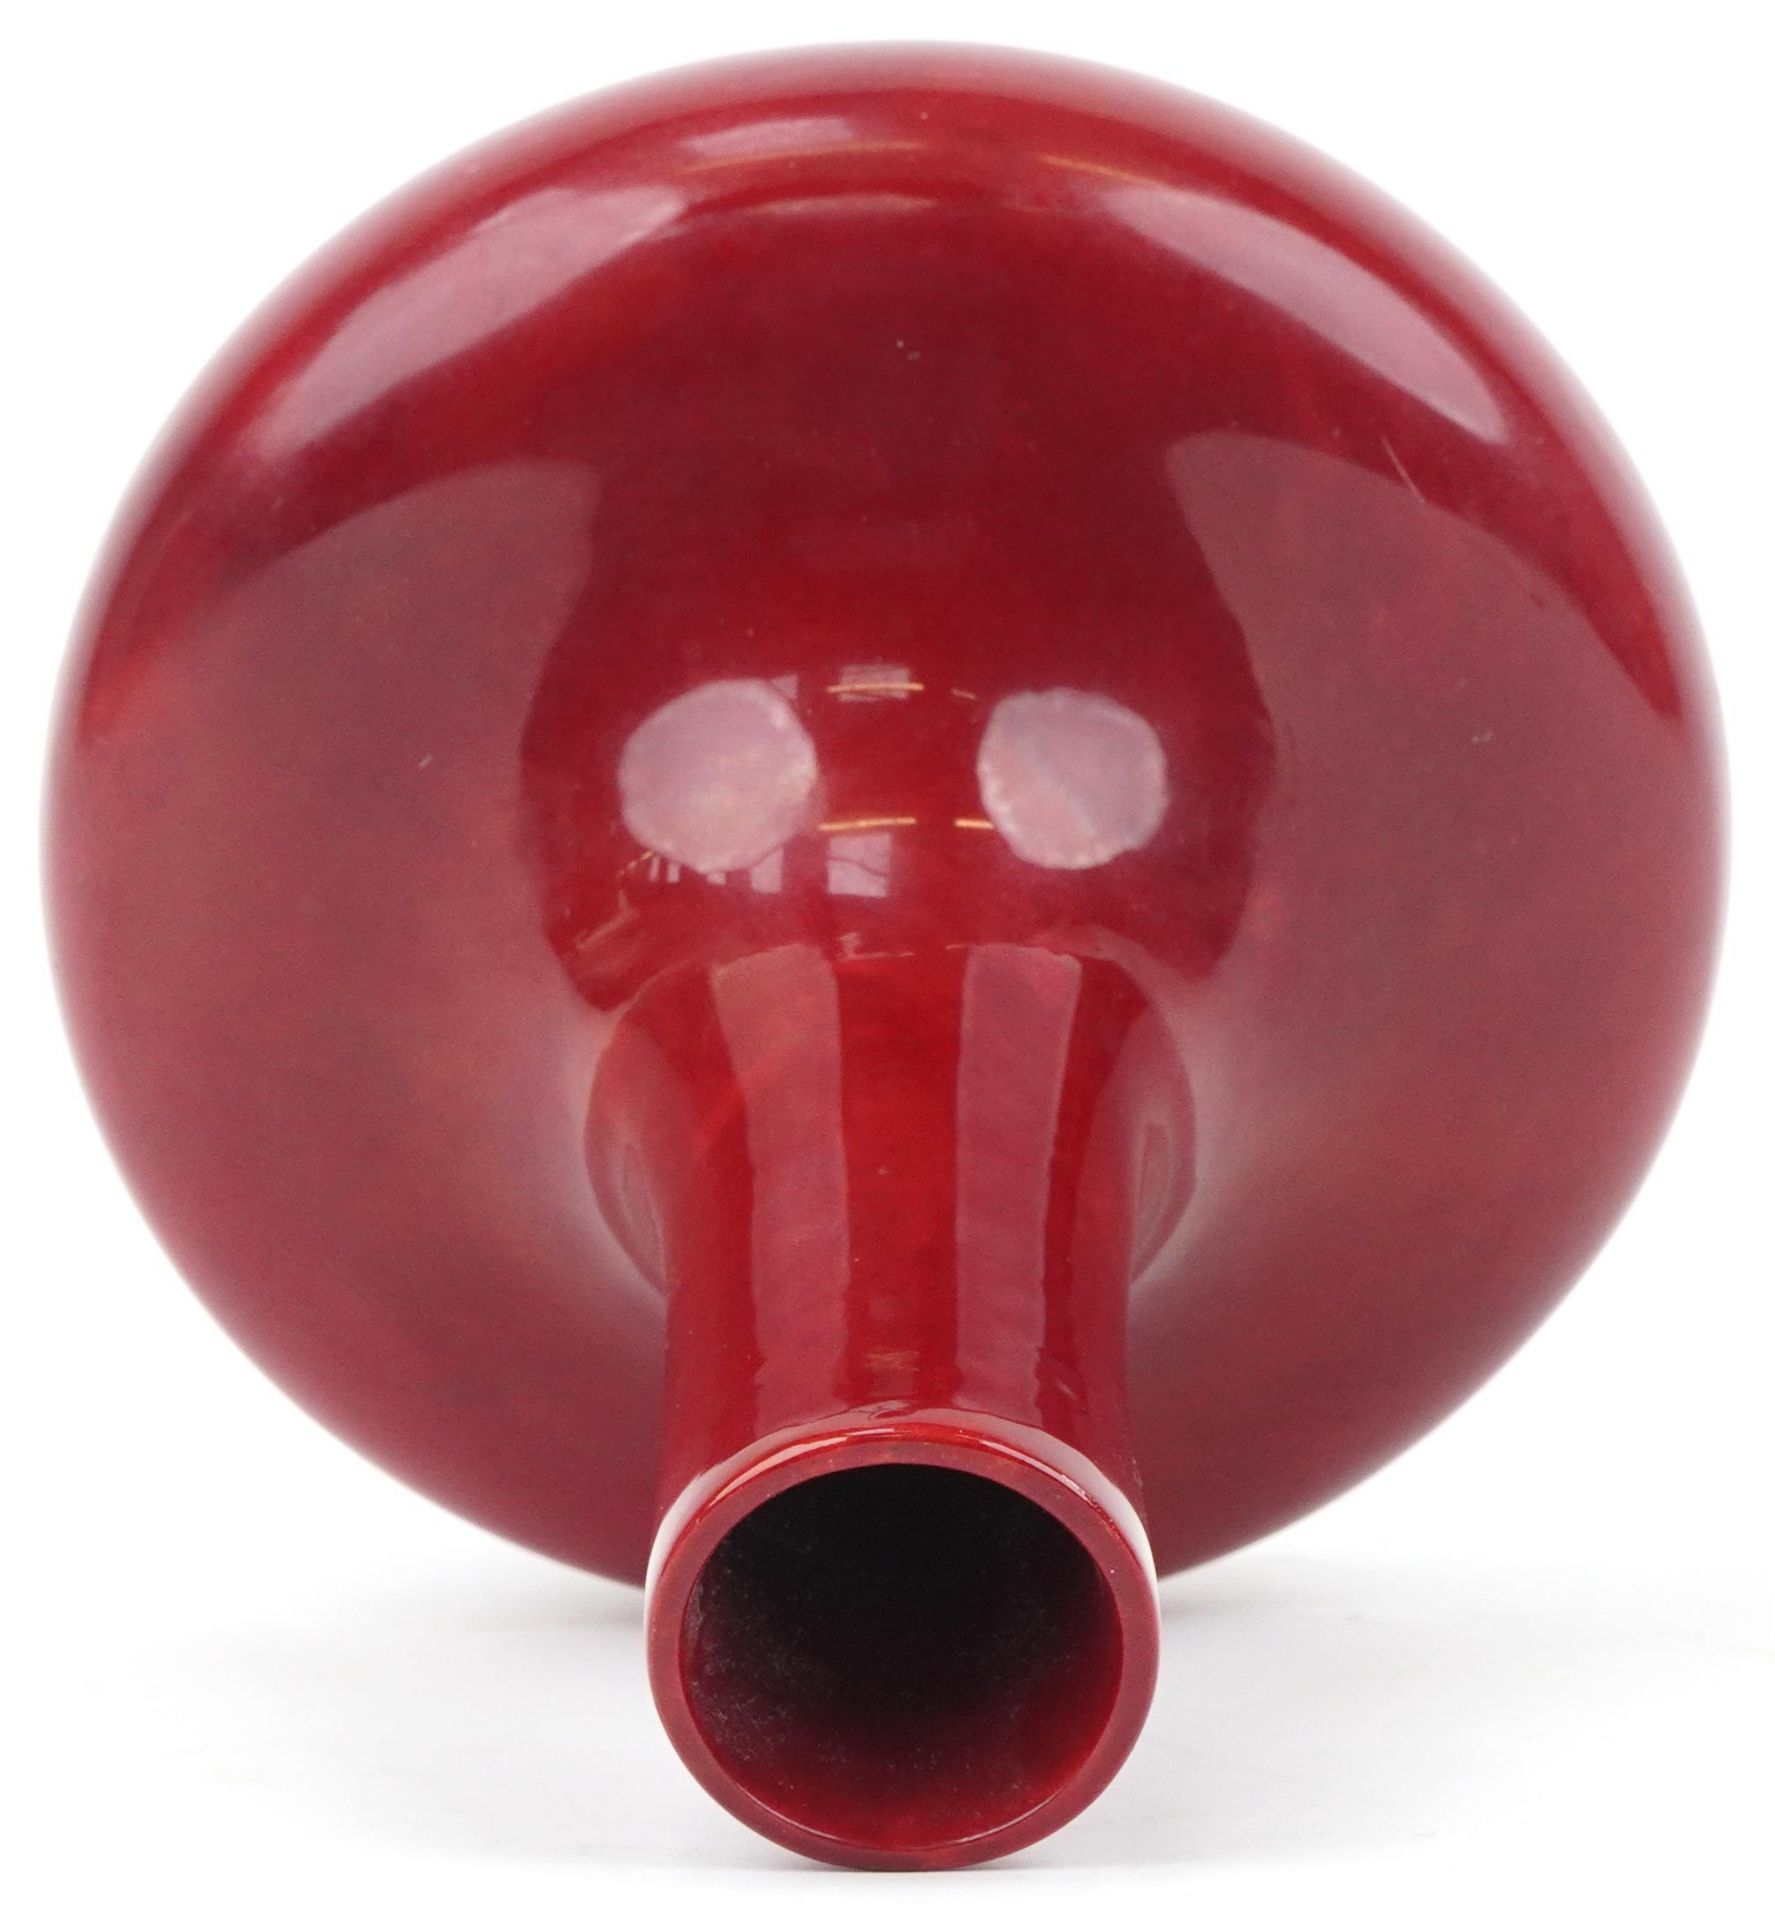 Large Bernard Moore red flambe vase, inscribed Bernard Moore to the base, numbered 1070, 25cm high - Image 3 of 6